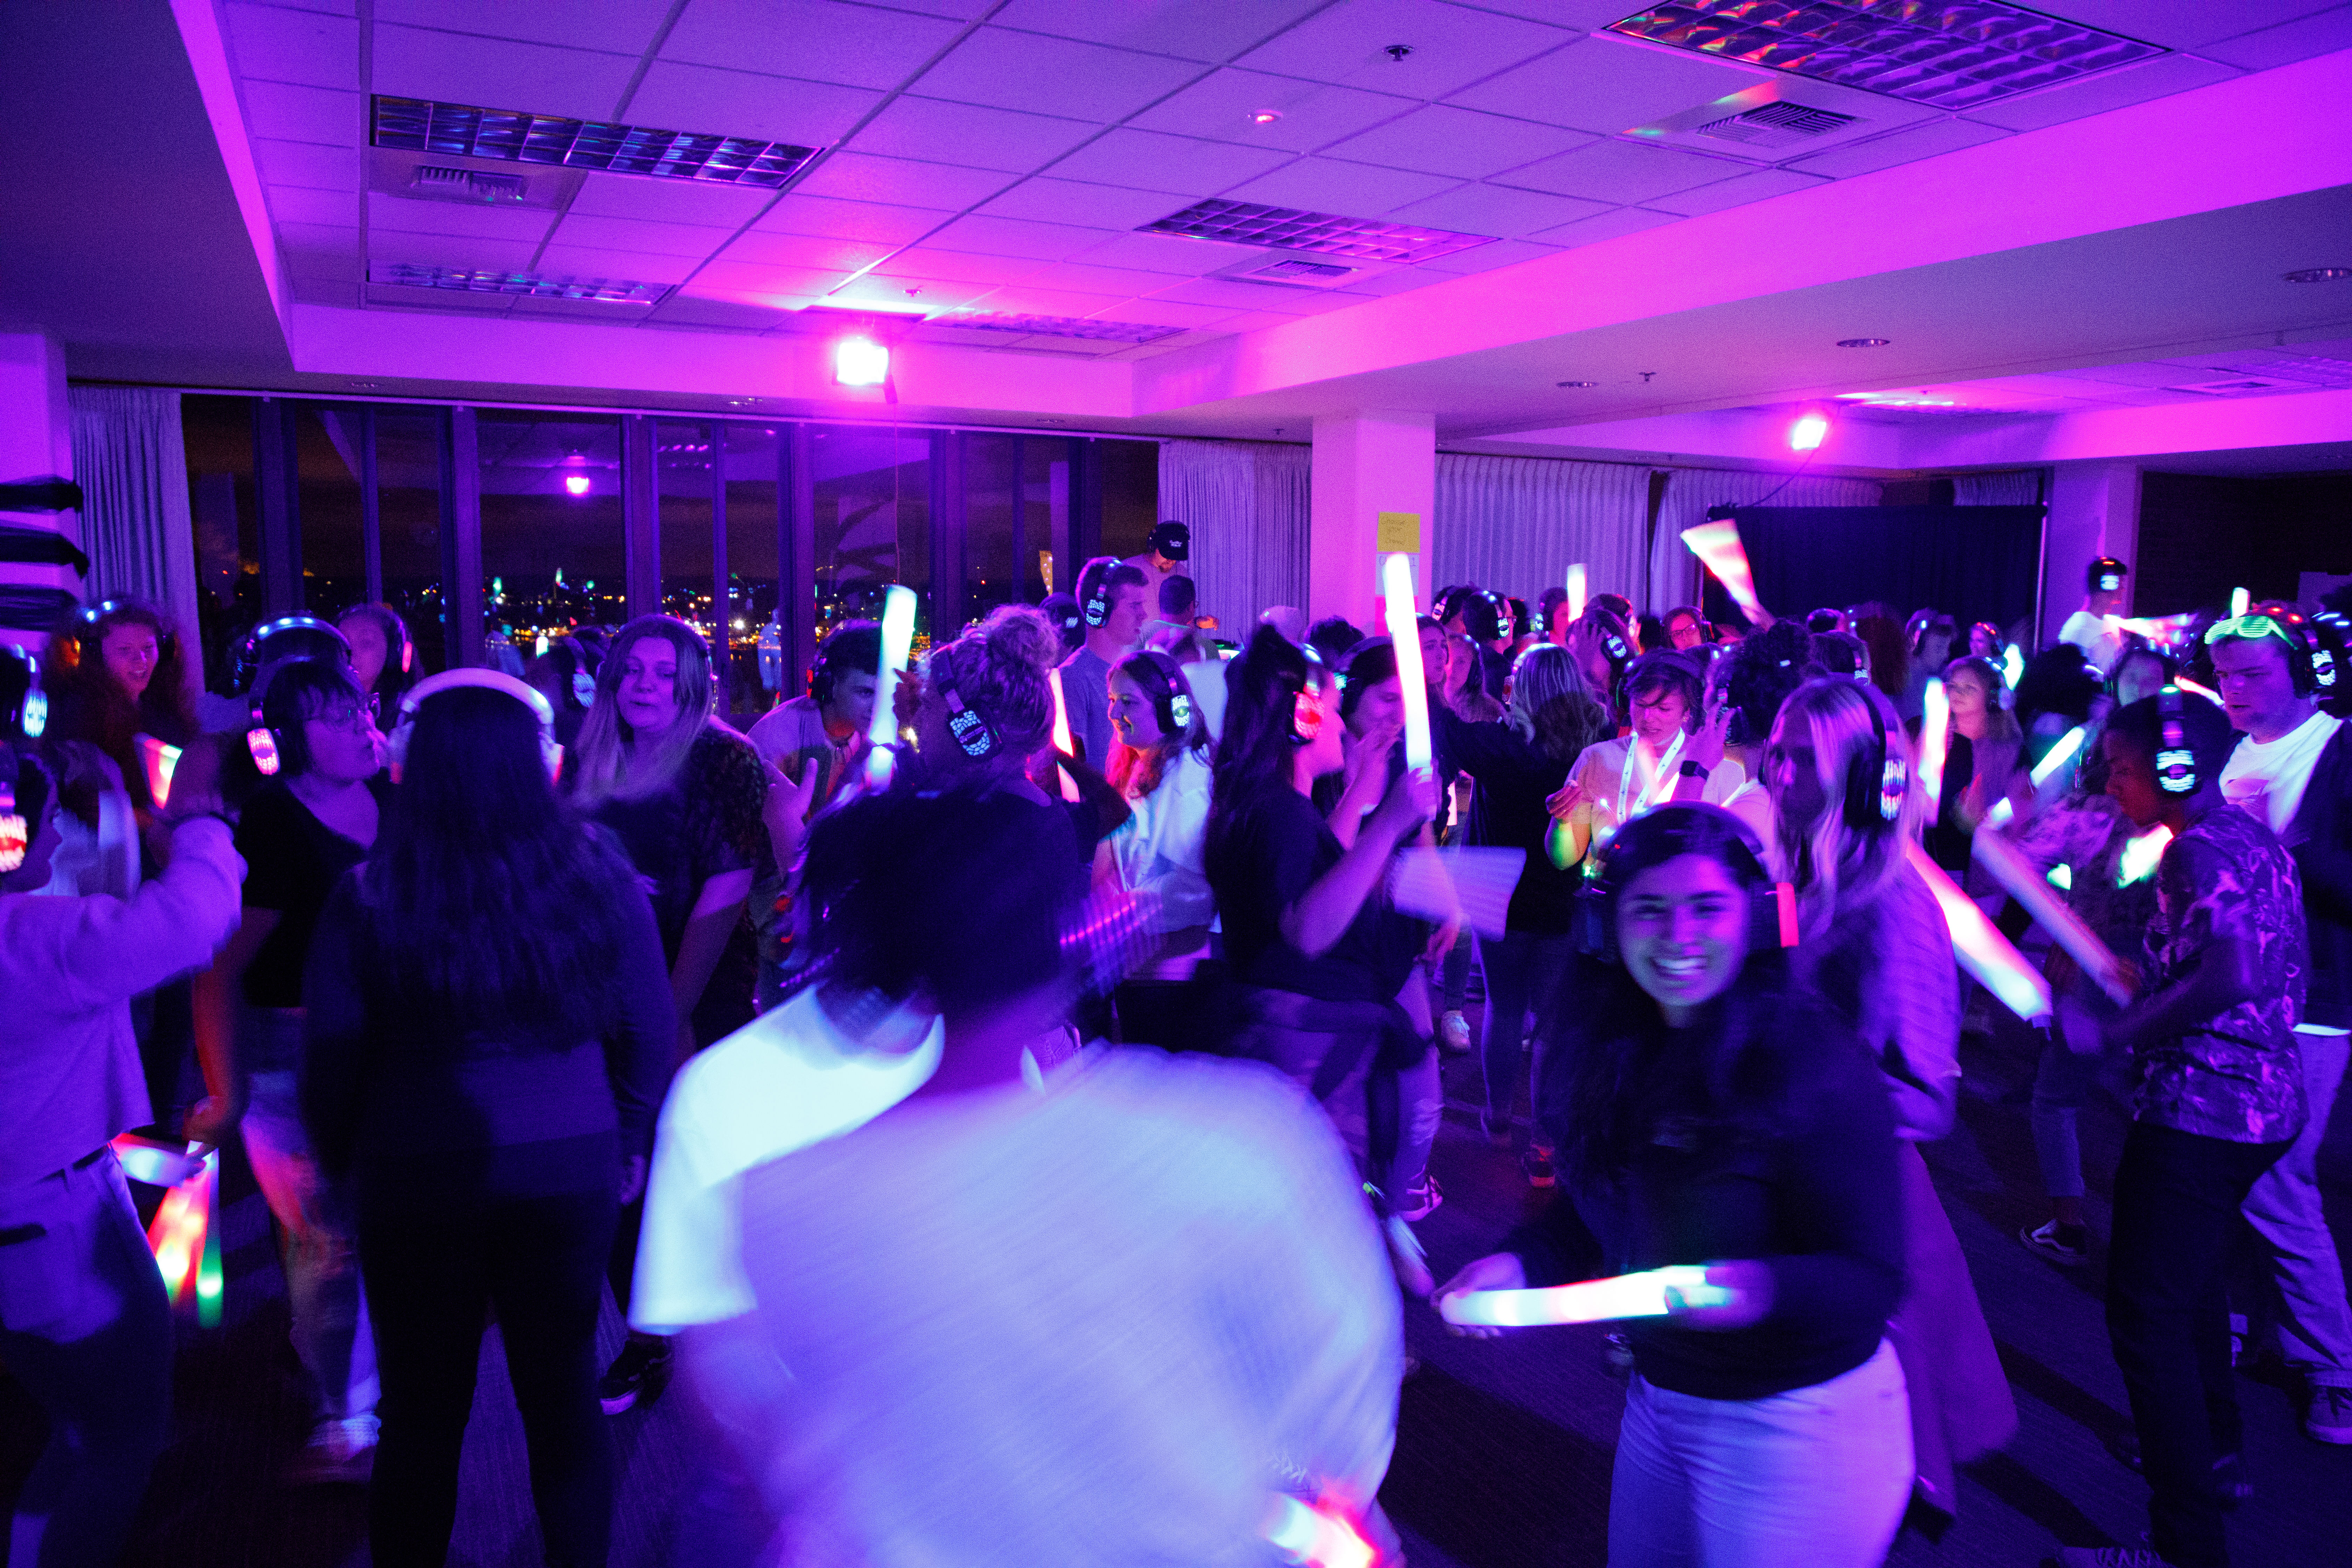 Image of the dance floor of the silent disco, many students are dancing and wearing wireless headphones lit up with colors and patterns.